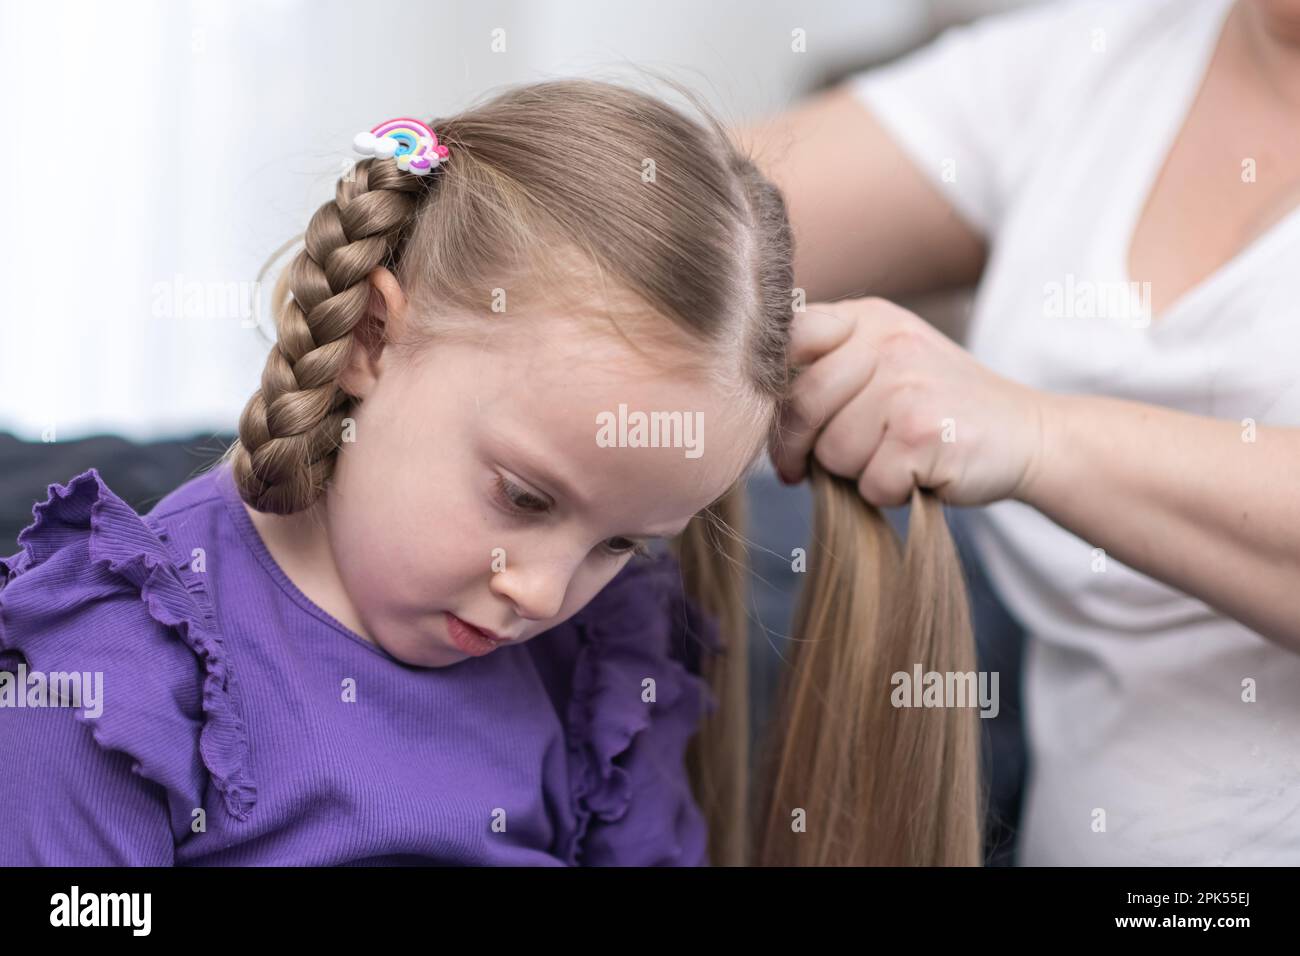 hairdresser stylist brushing child girl blond hair and styling hairdo braid hairstyle getting ready Stock Photo